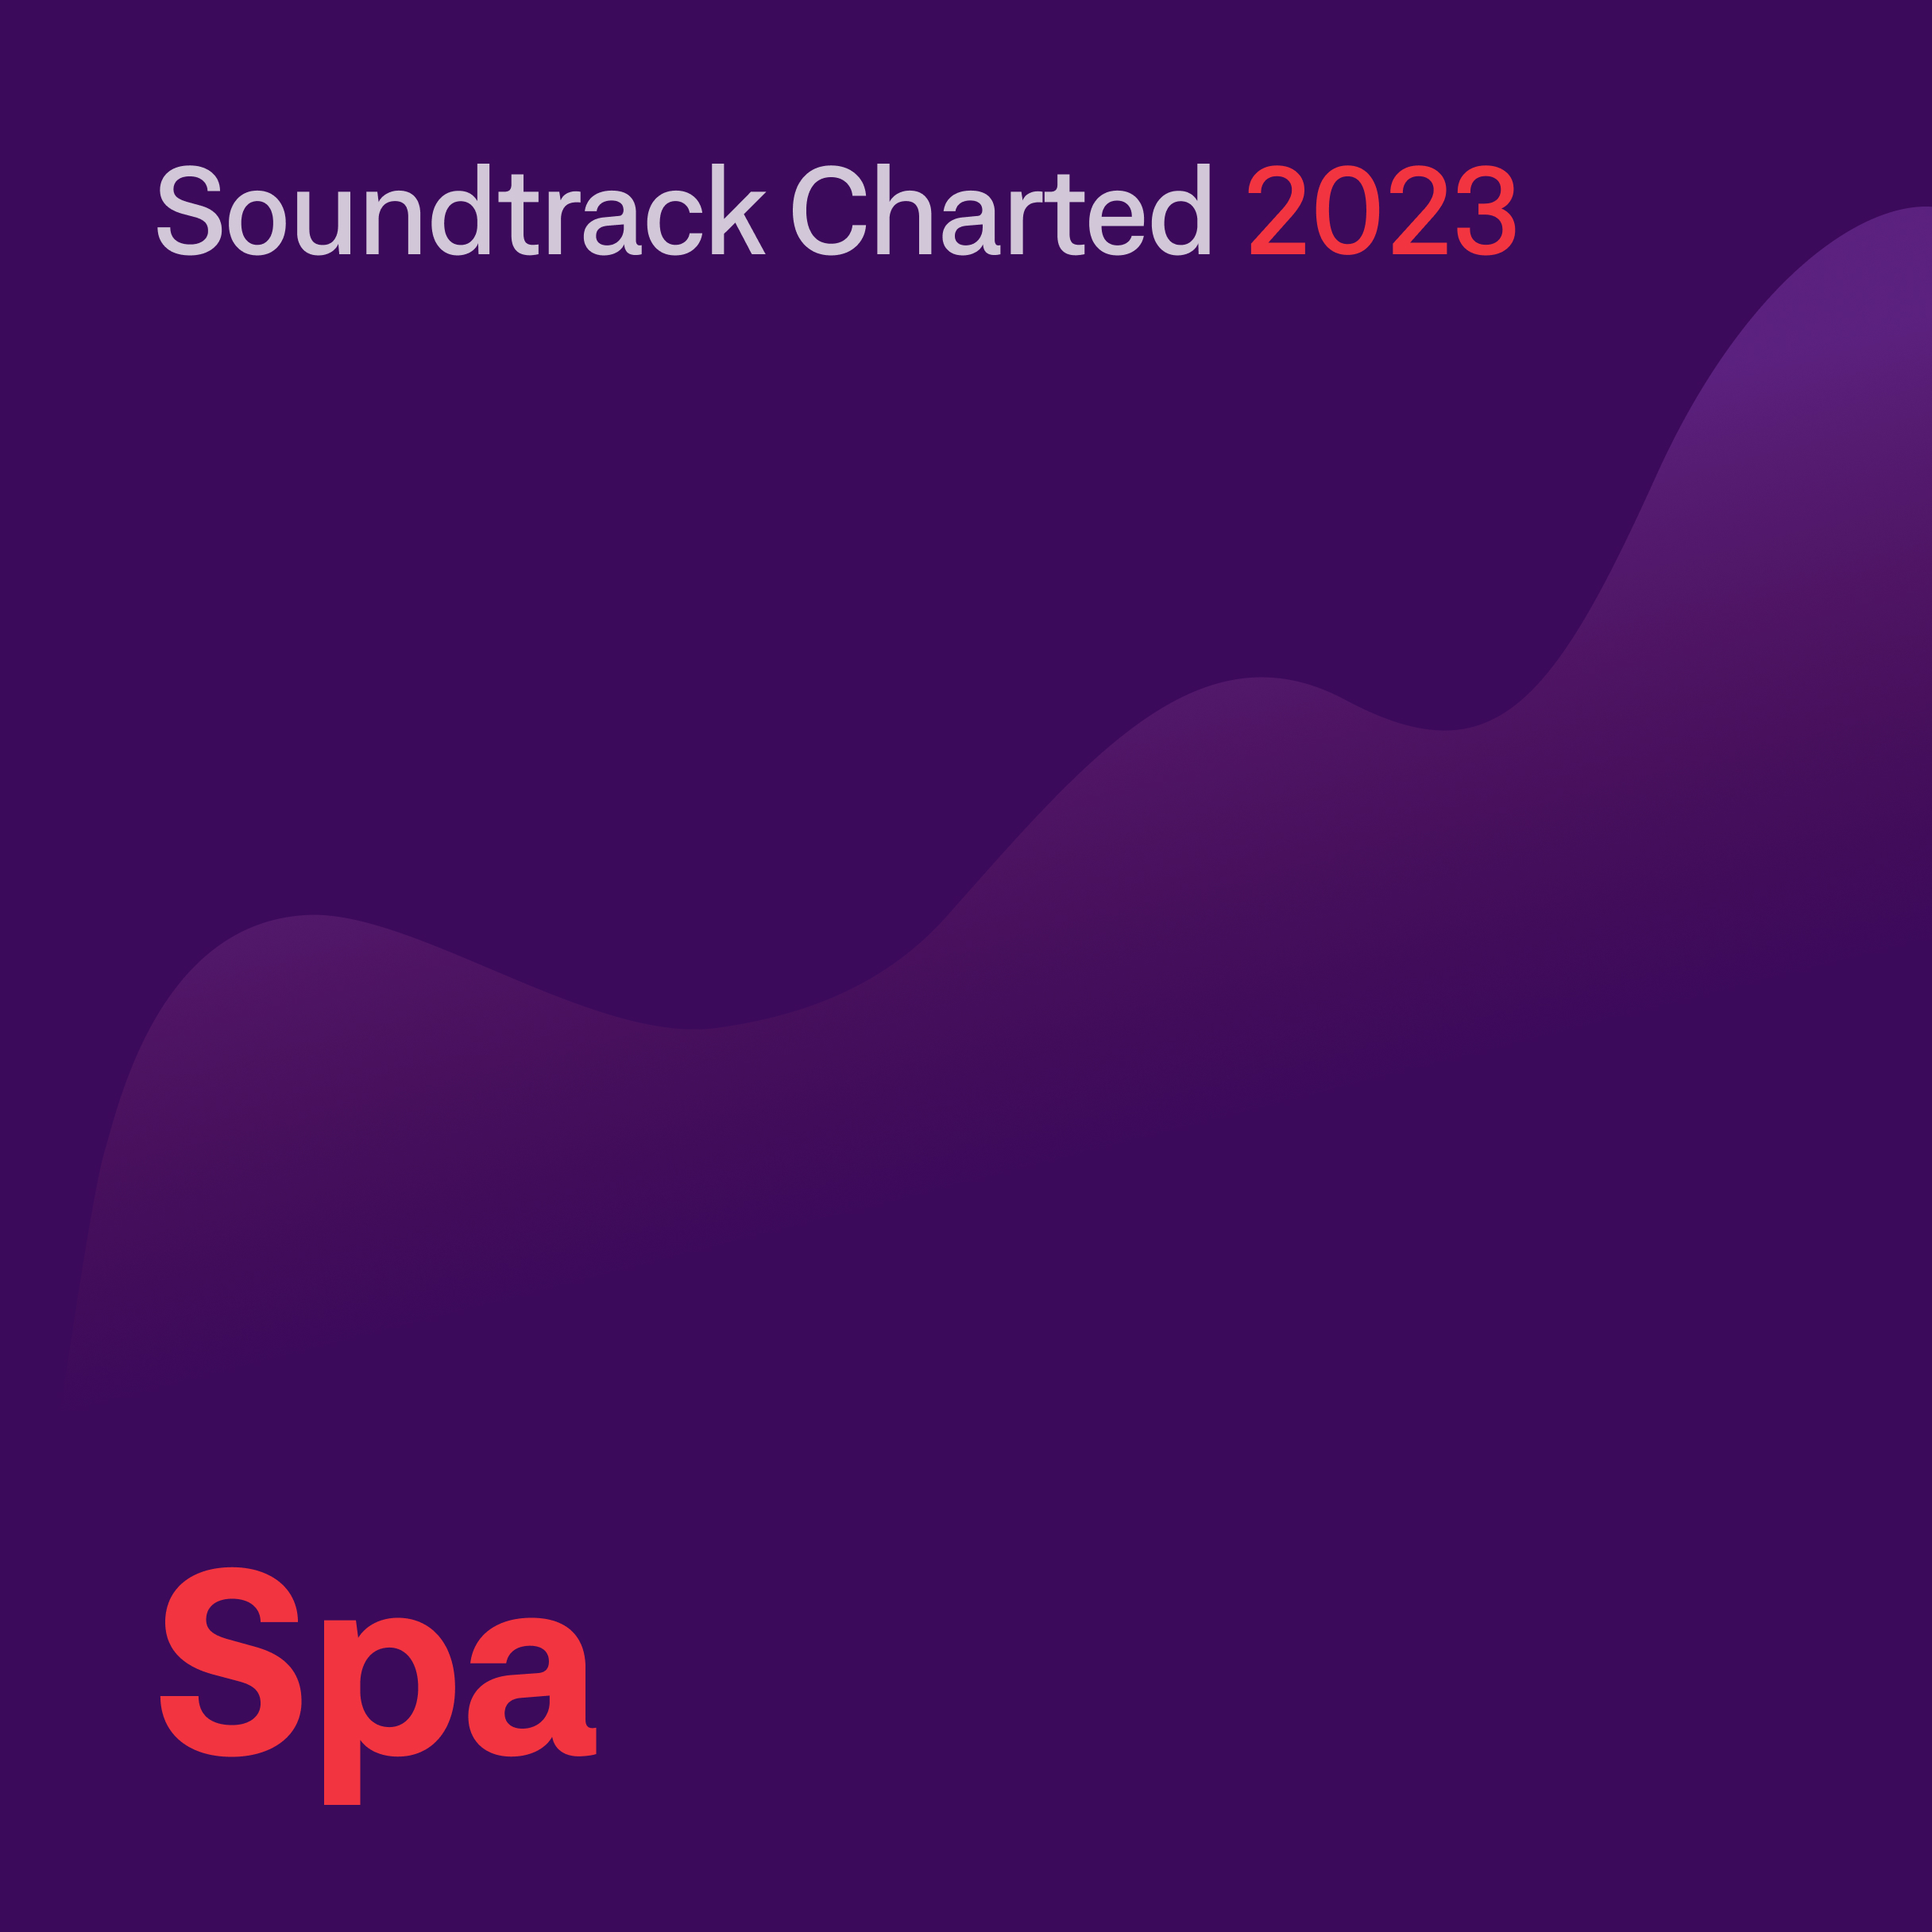 Soundtrack Charted 2023 - spa